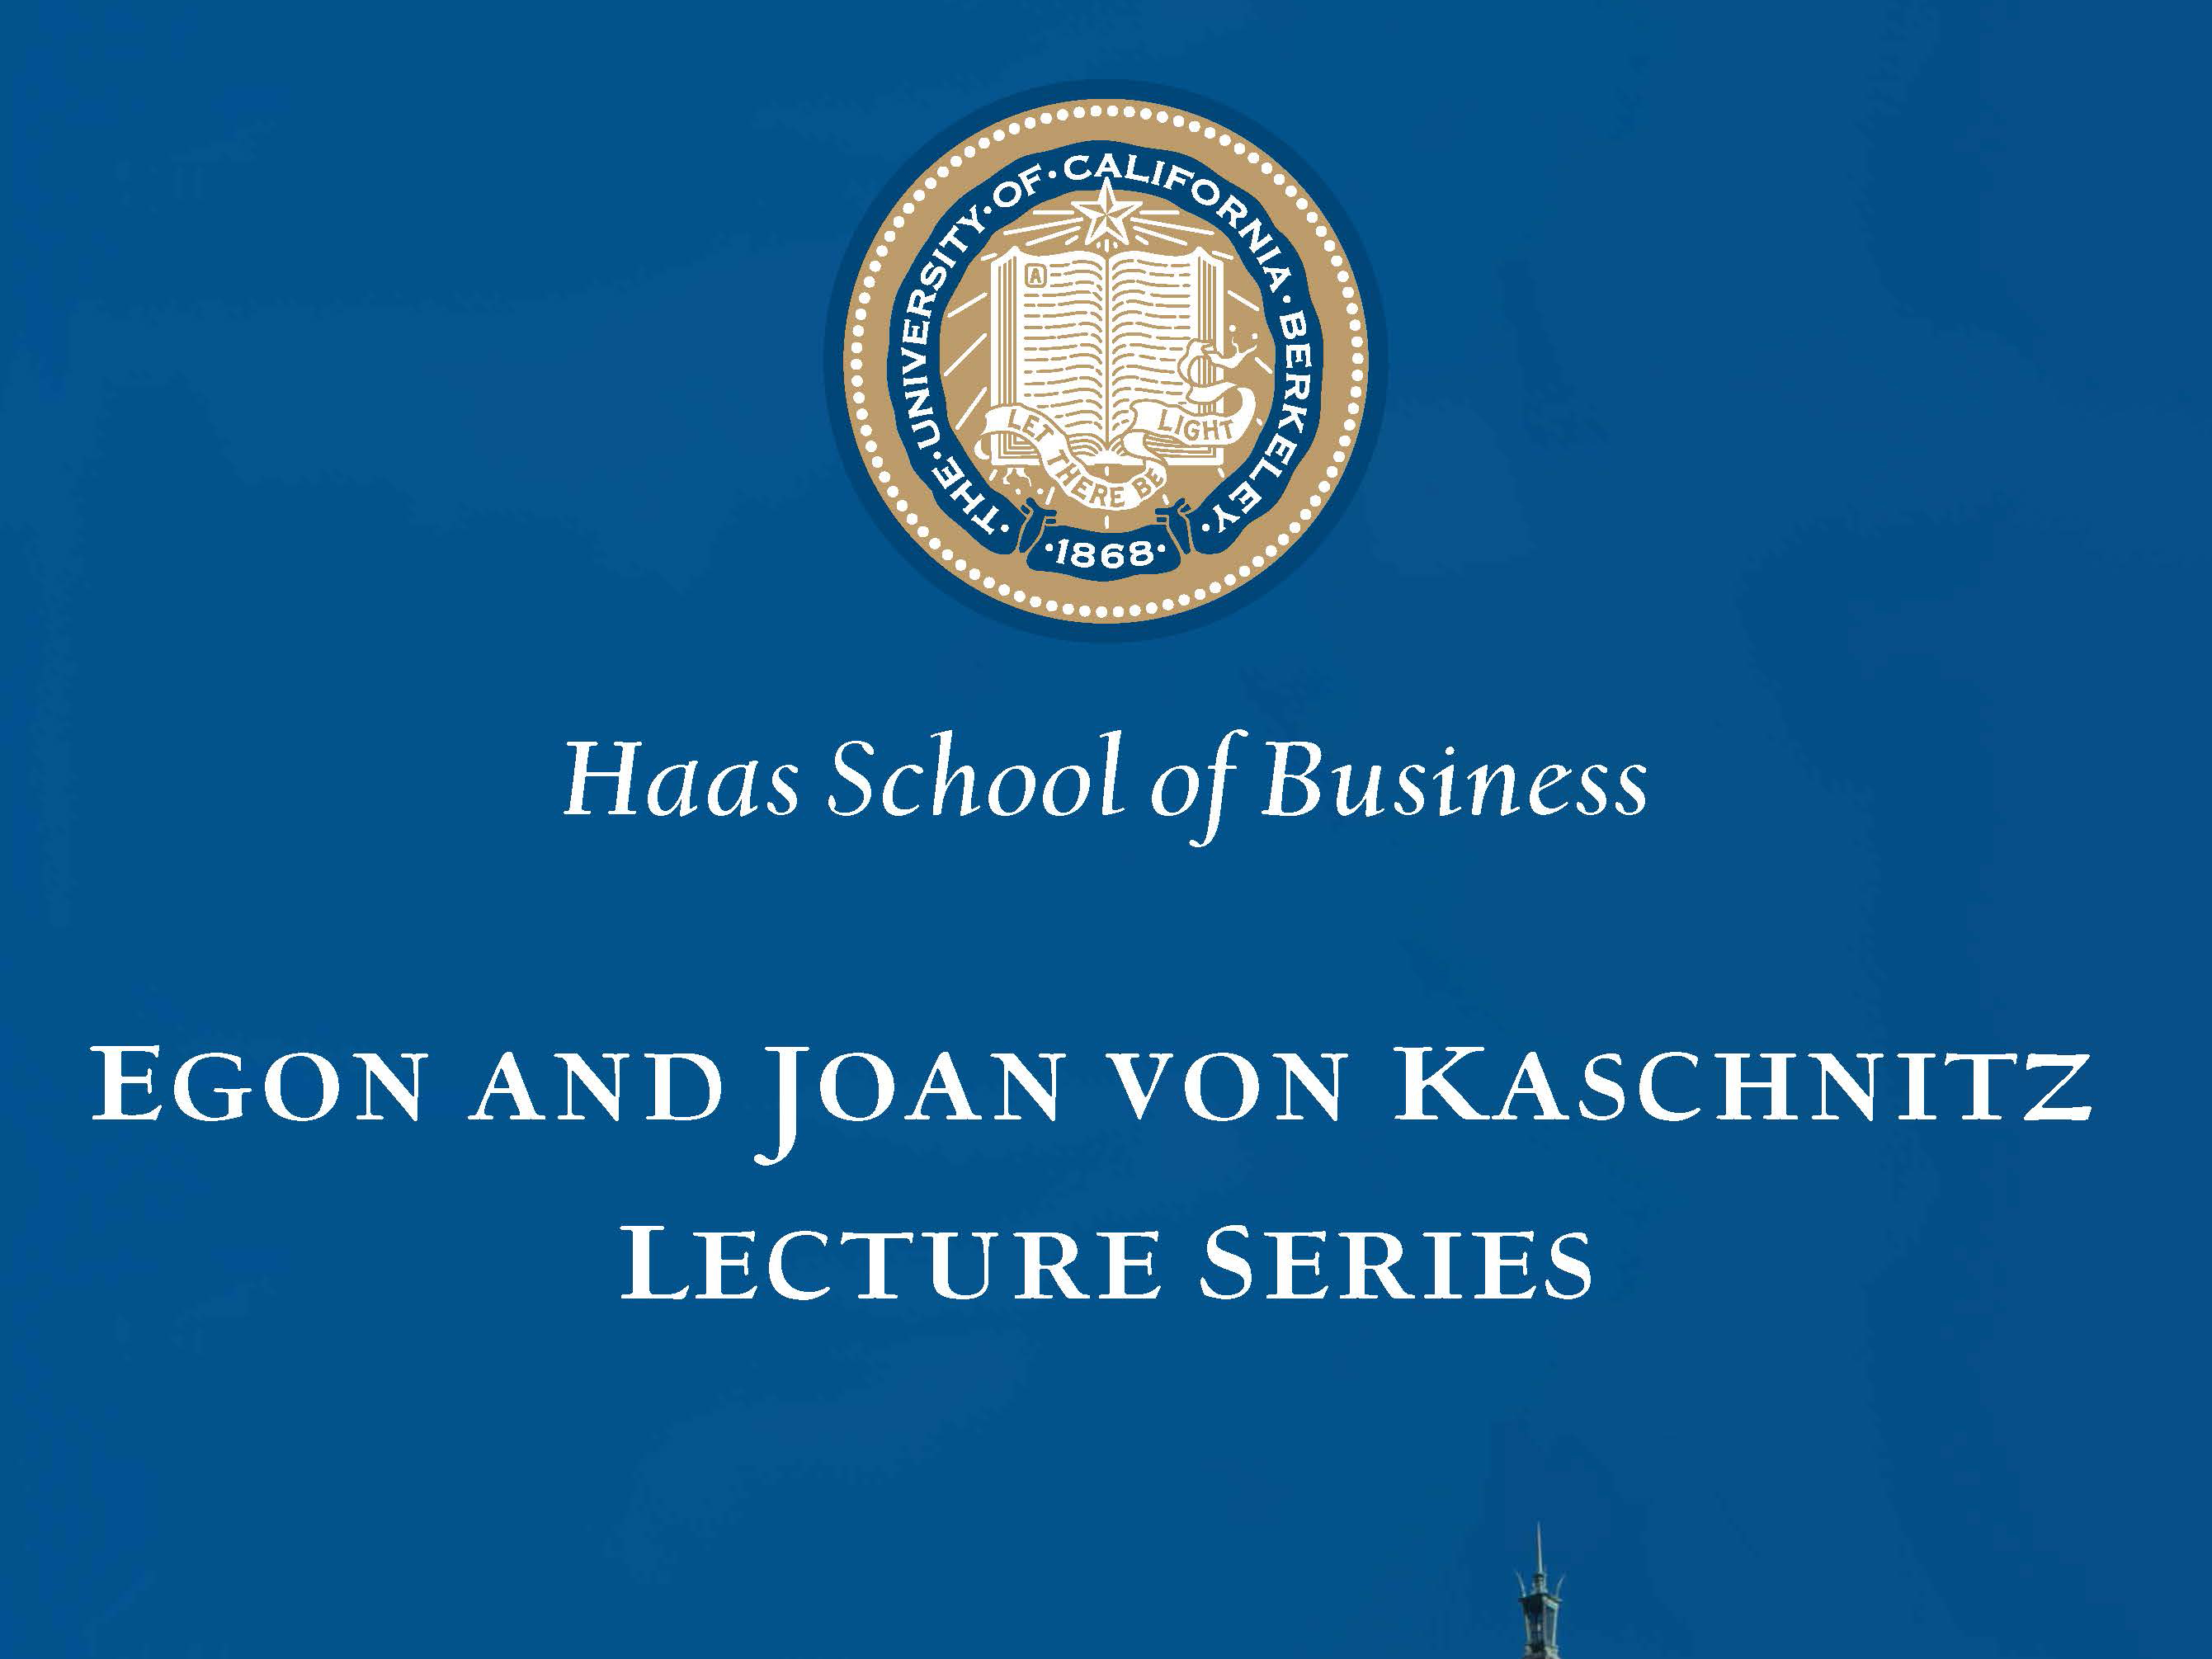 The Egon and Joan von Kaschnitz Lecture Series